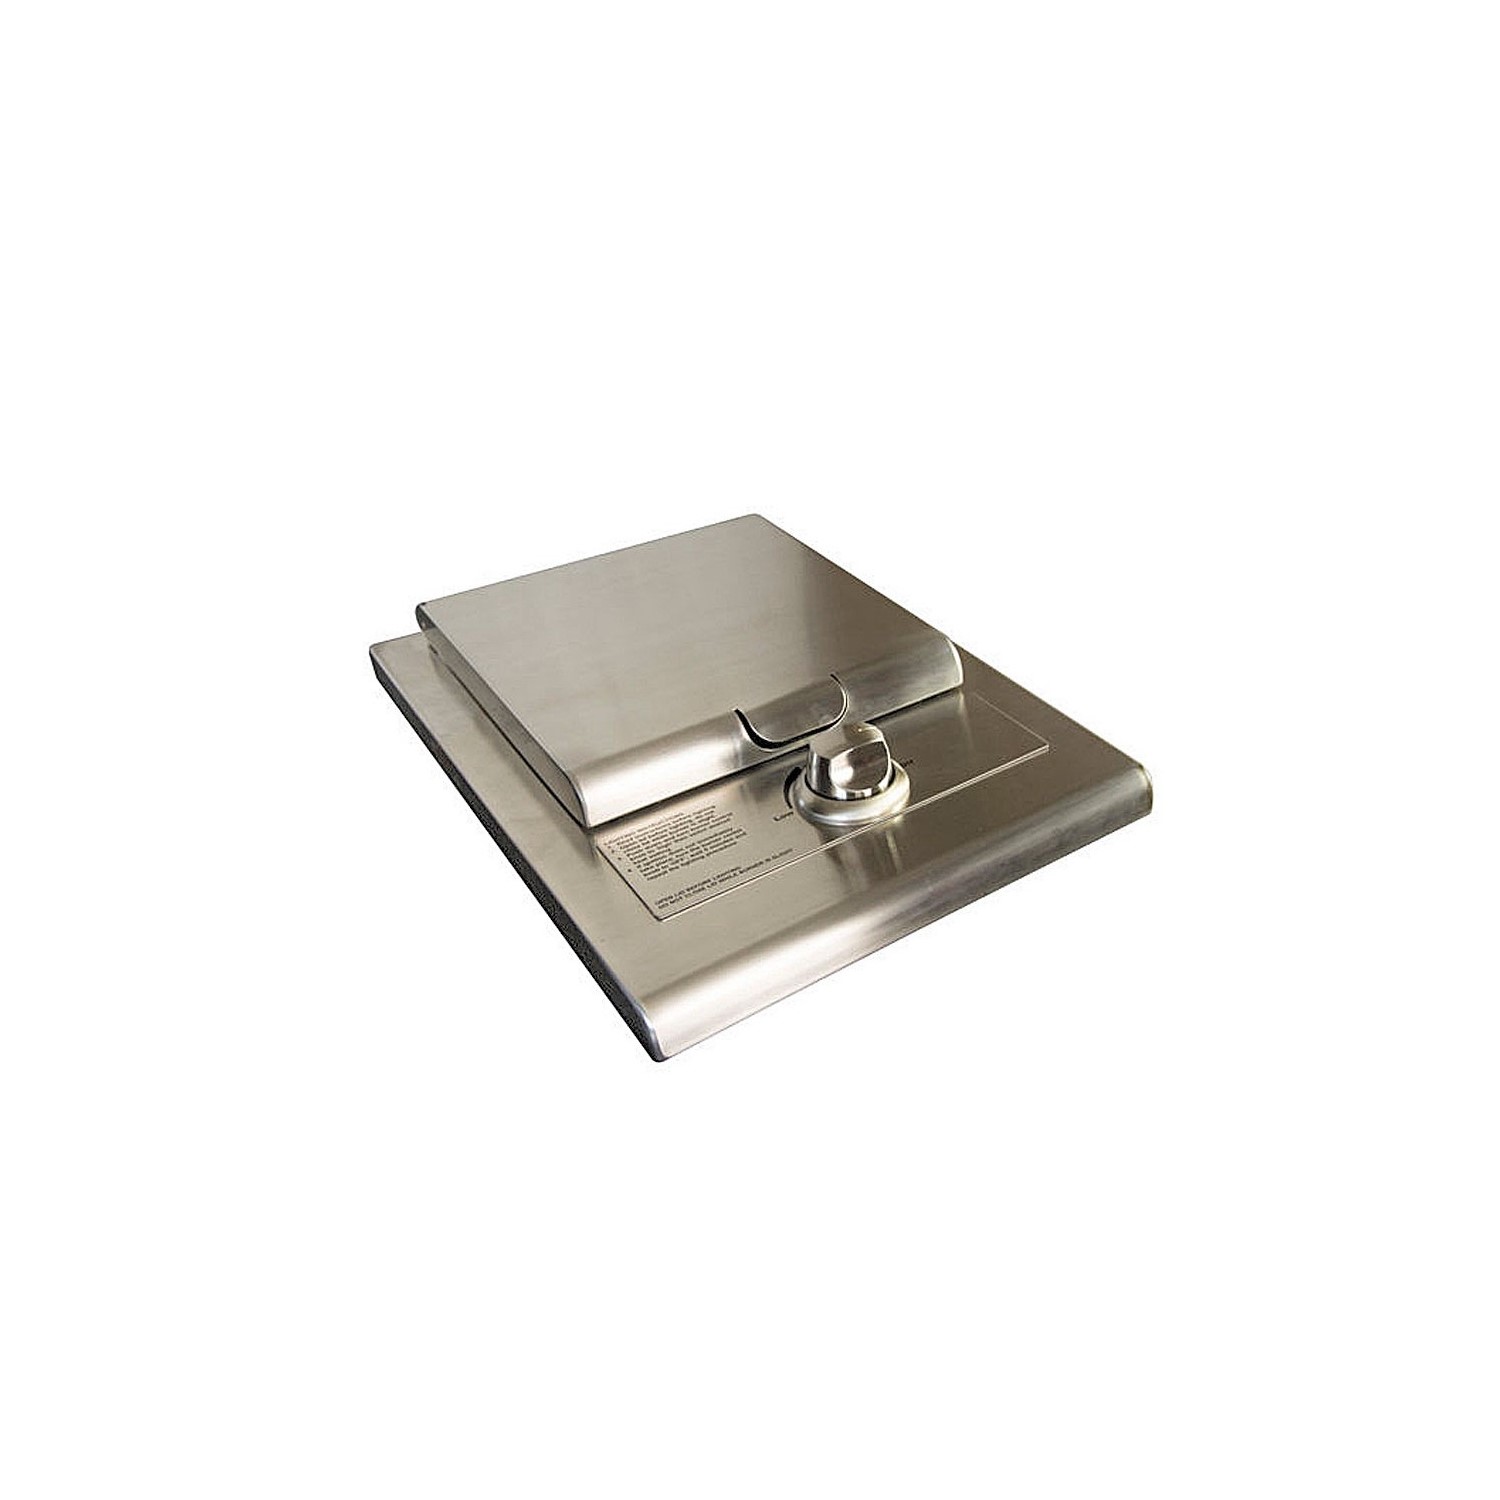 Beefeater 3000 Series Built In BBQ Kitchen Side Burner - Stainless Steel